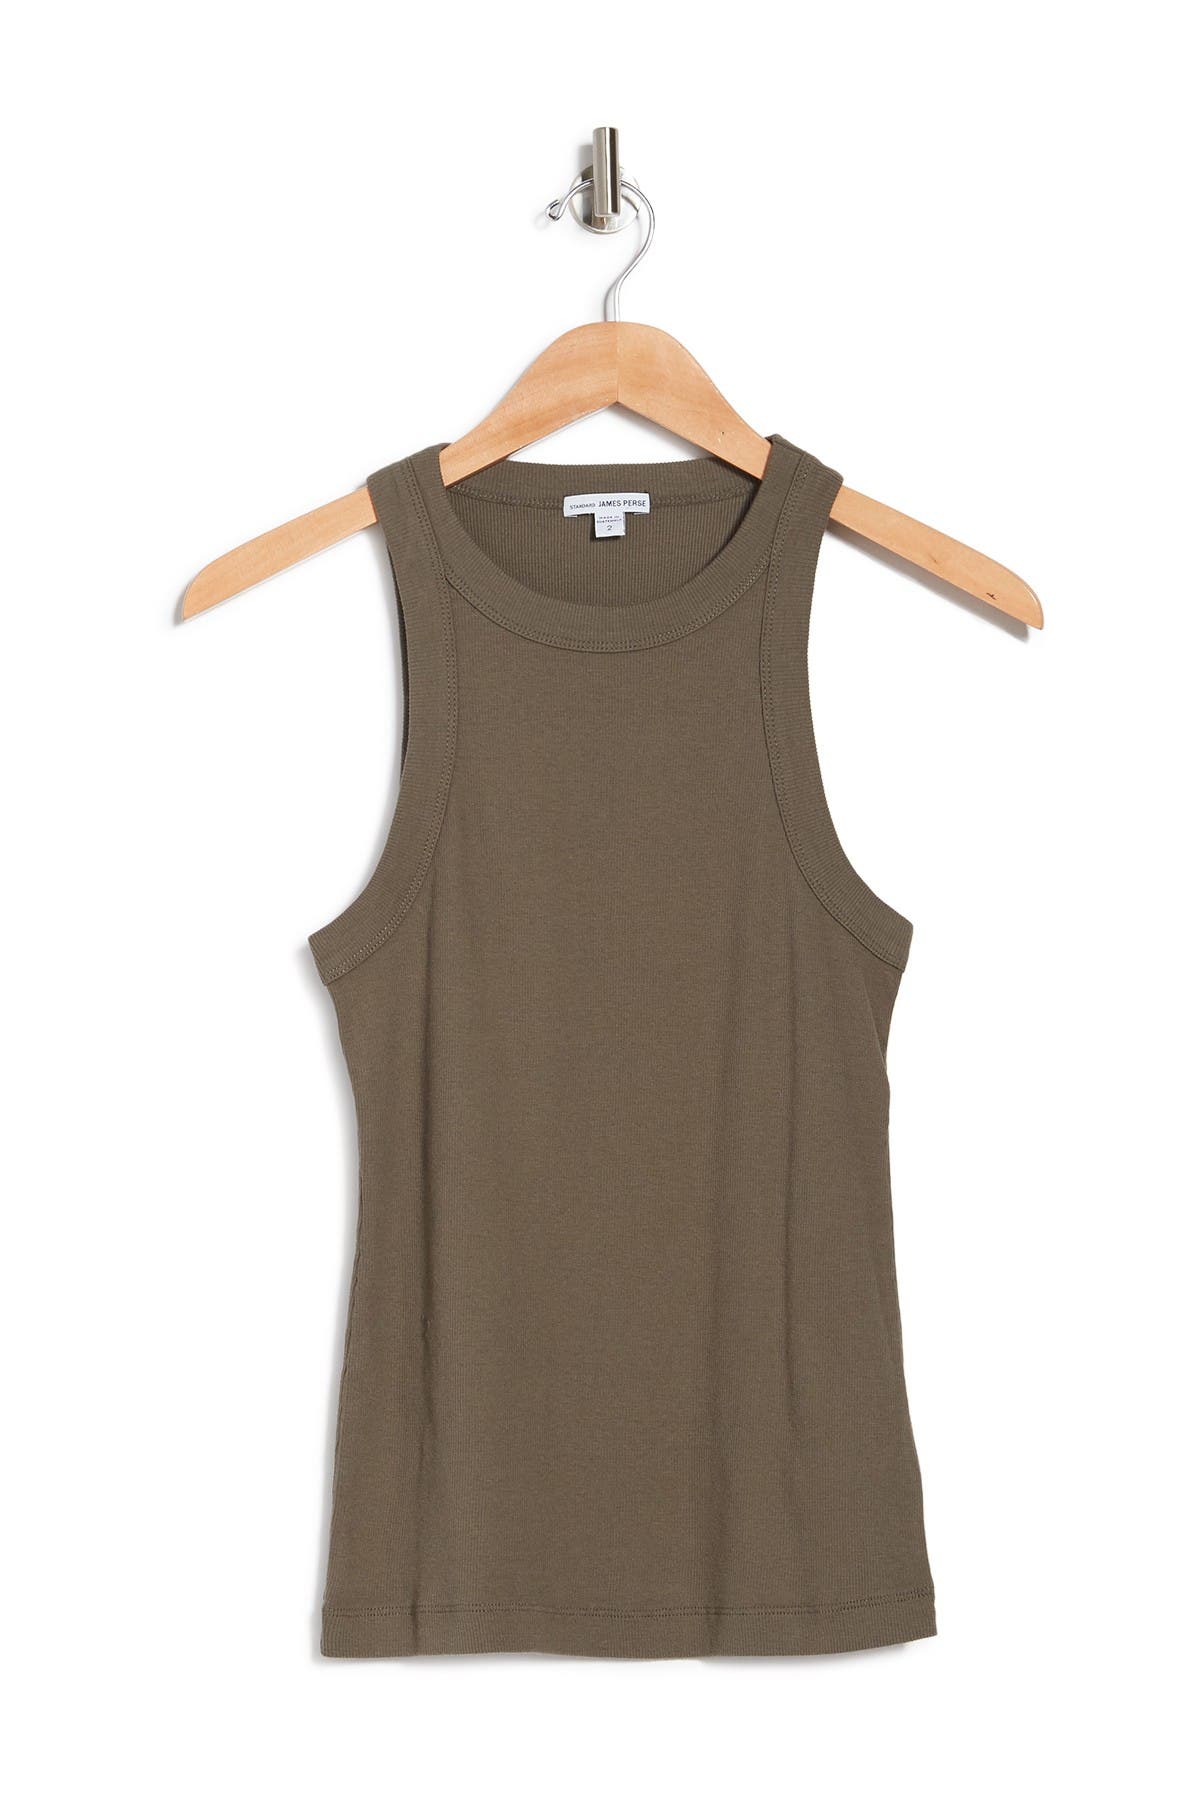 James Perse Ribbed Knit Tank In Artillery